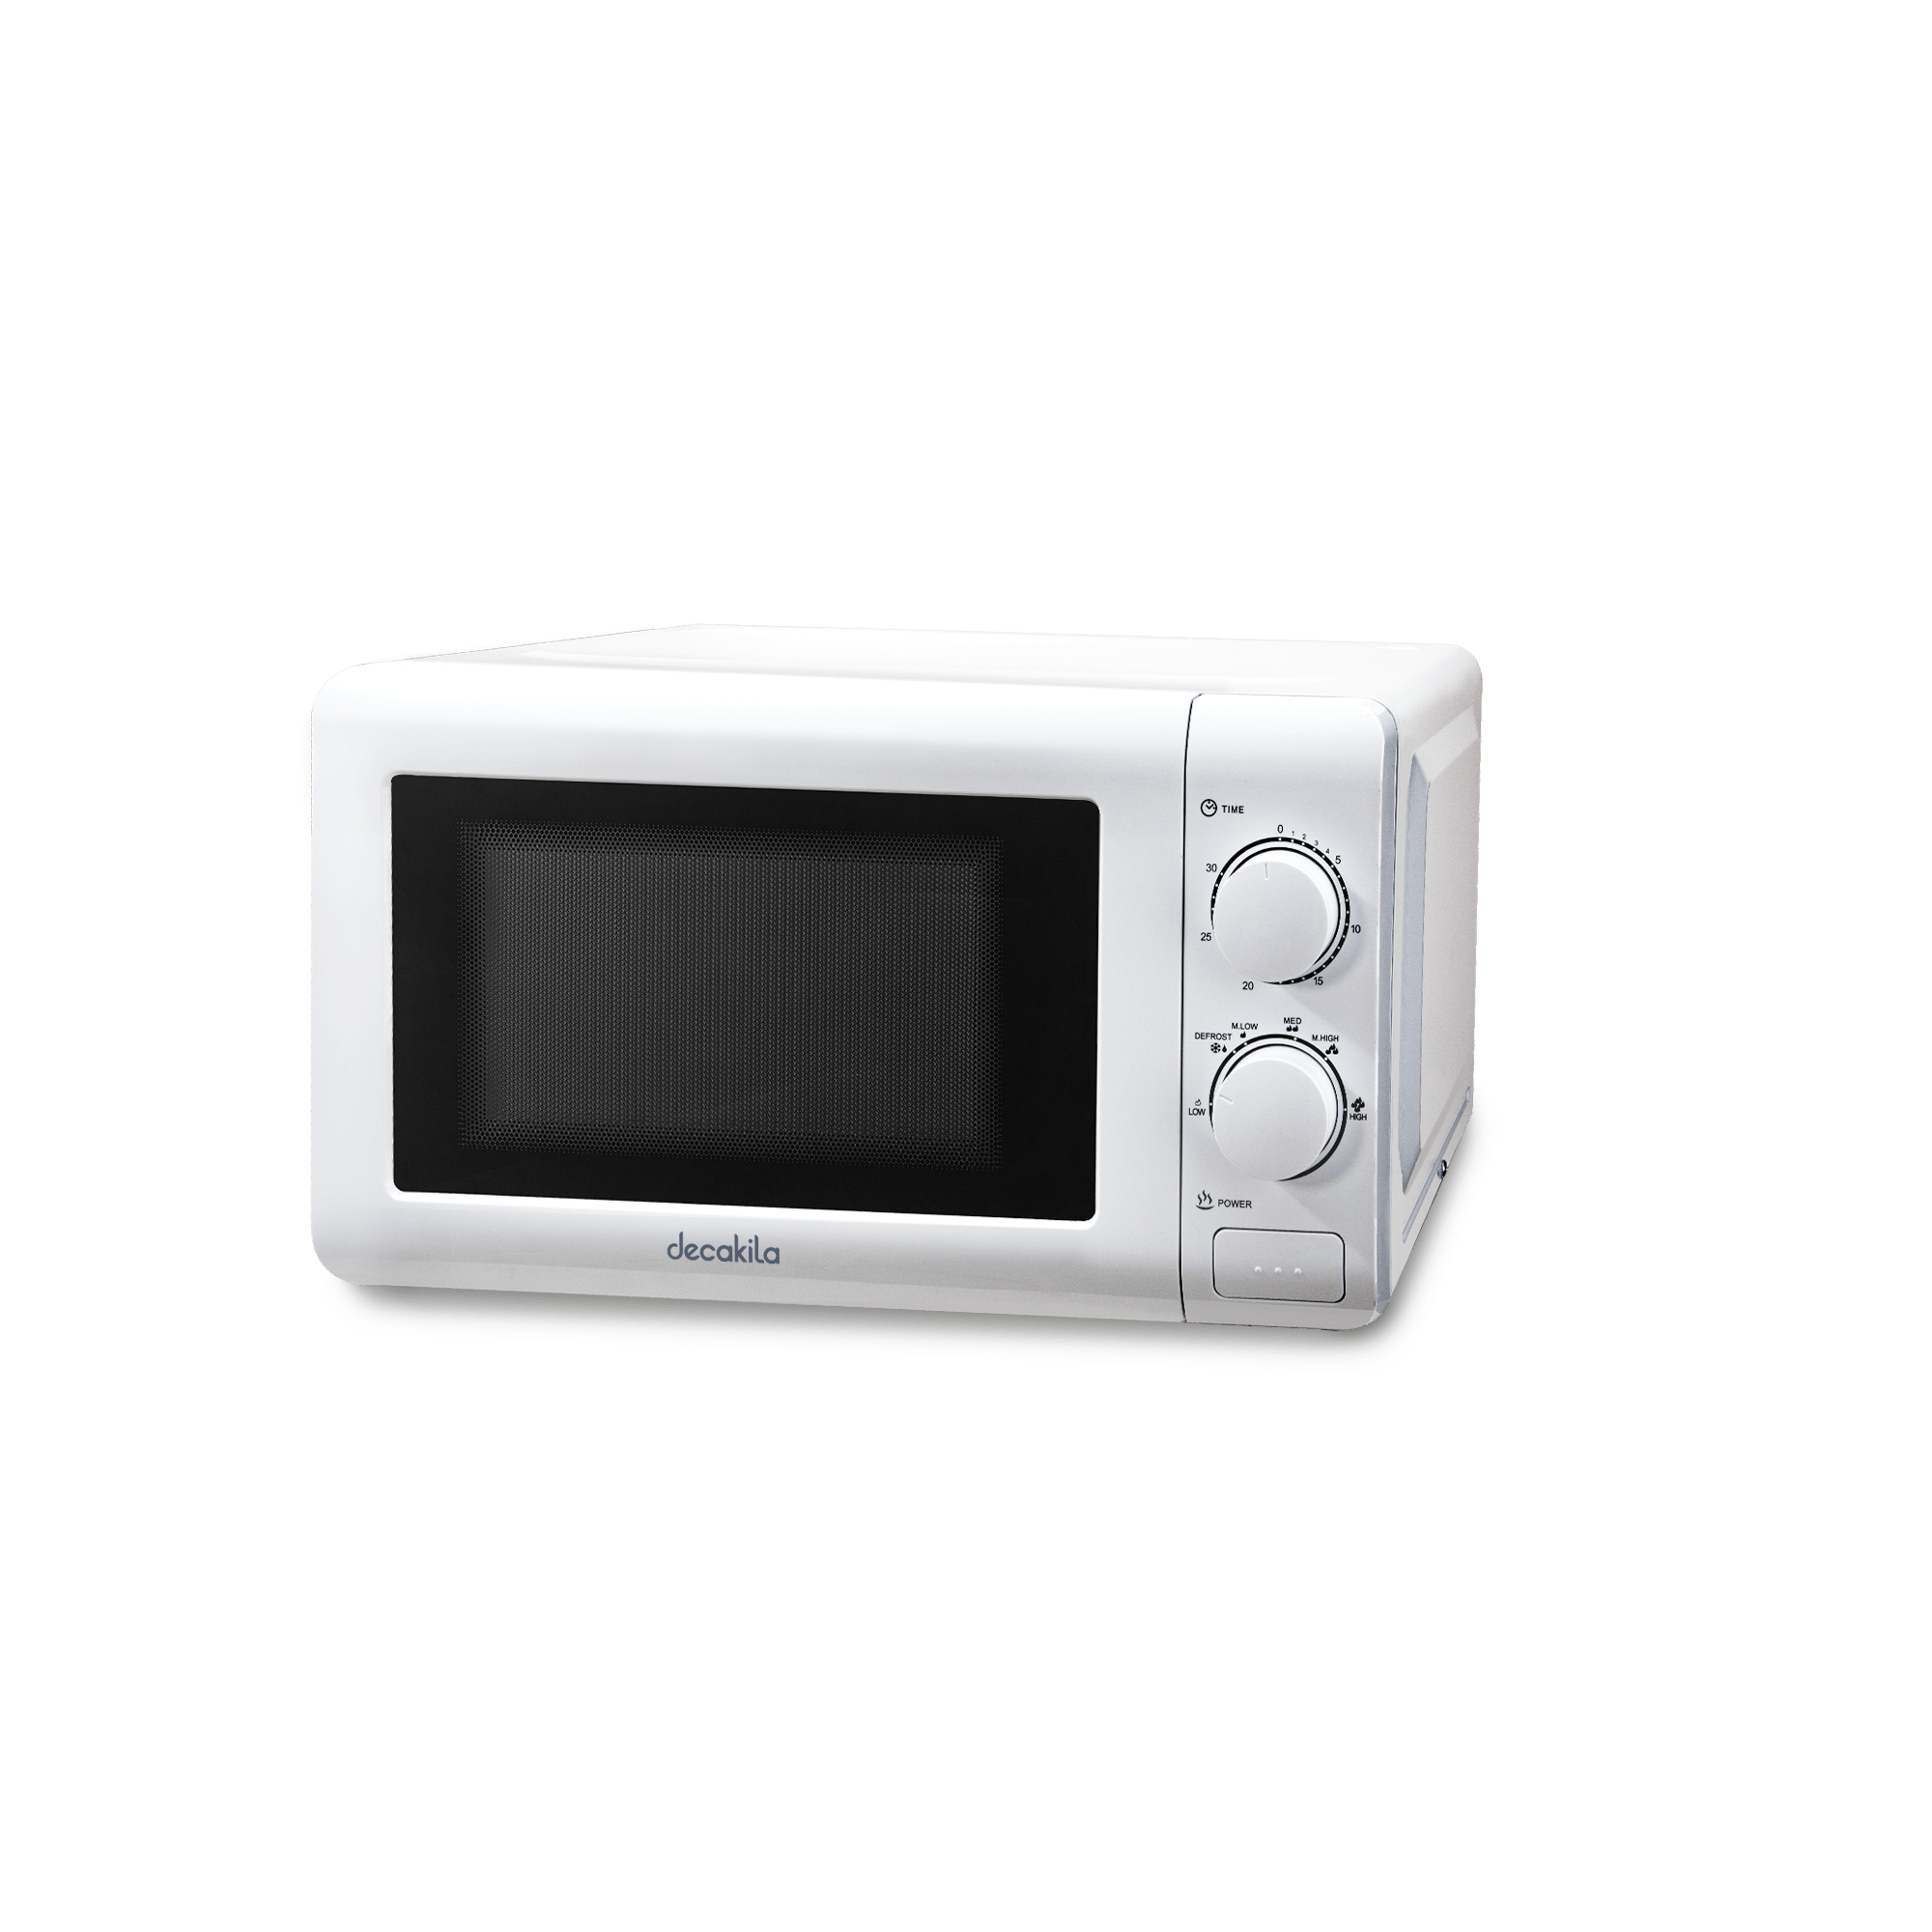 Decakila 20L Microwave Oven 700W - KEMC007W | Buy Online in Accra, Ghana - Supply Master Kitchen Appliances Buy Tools hardware Building materials